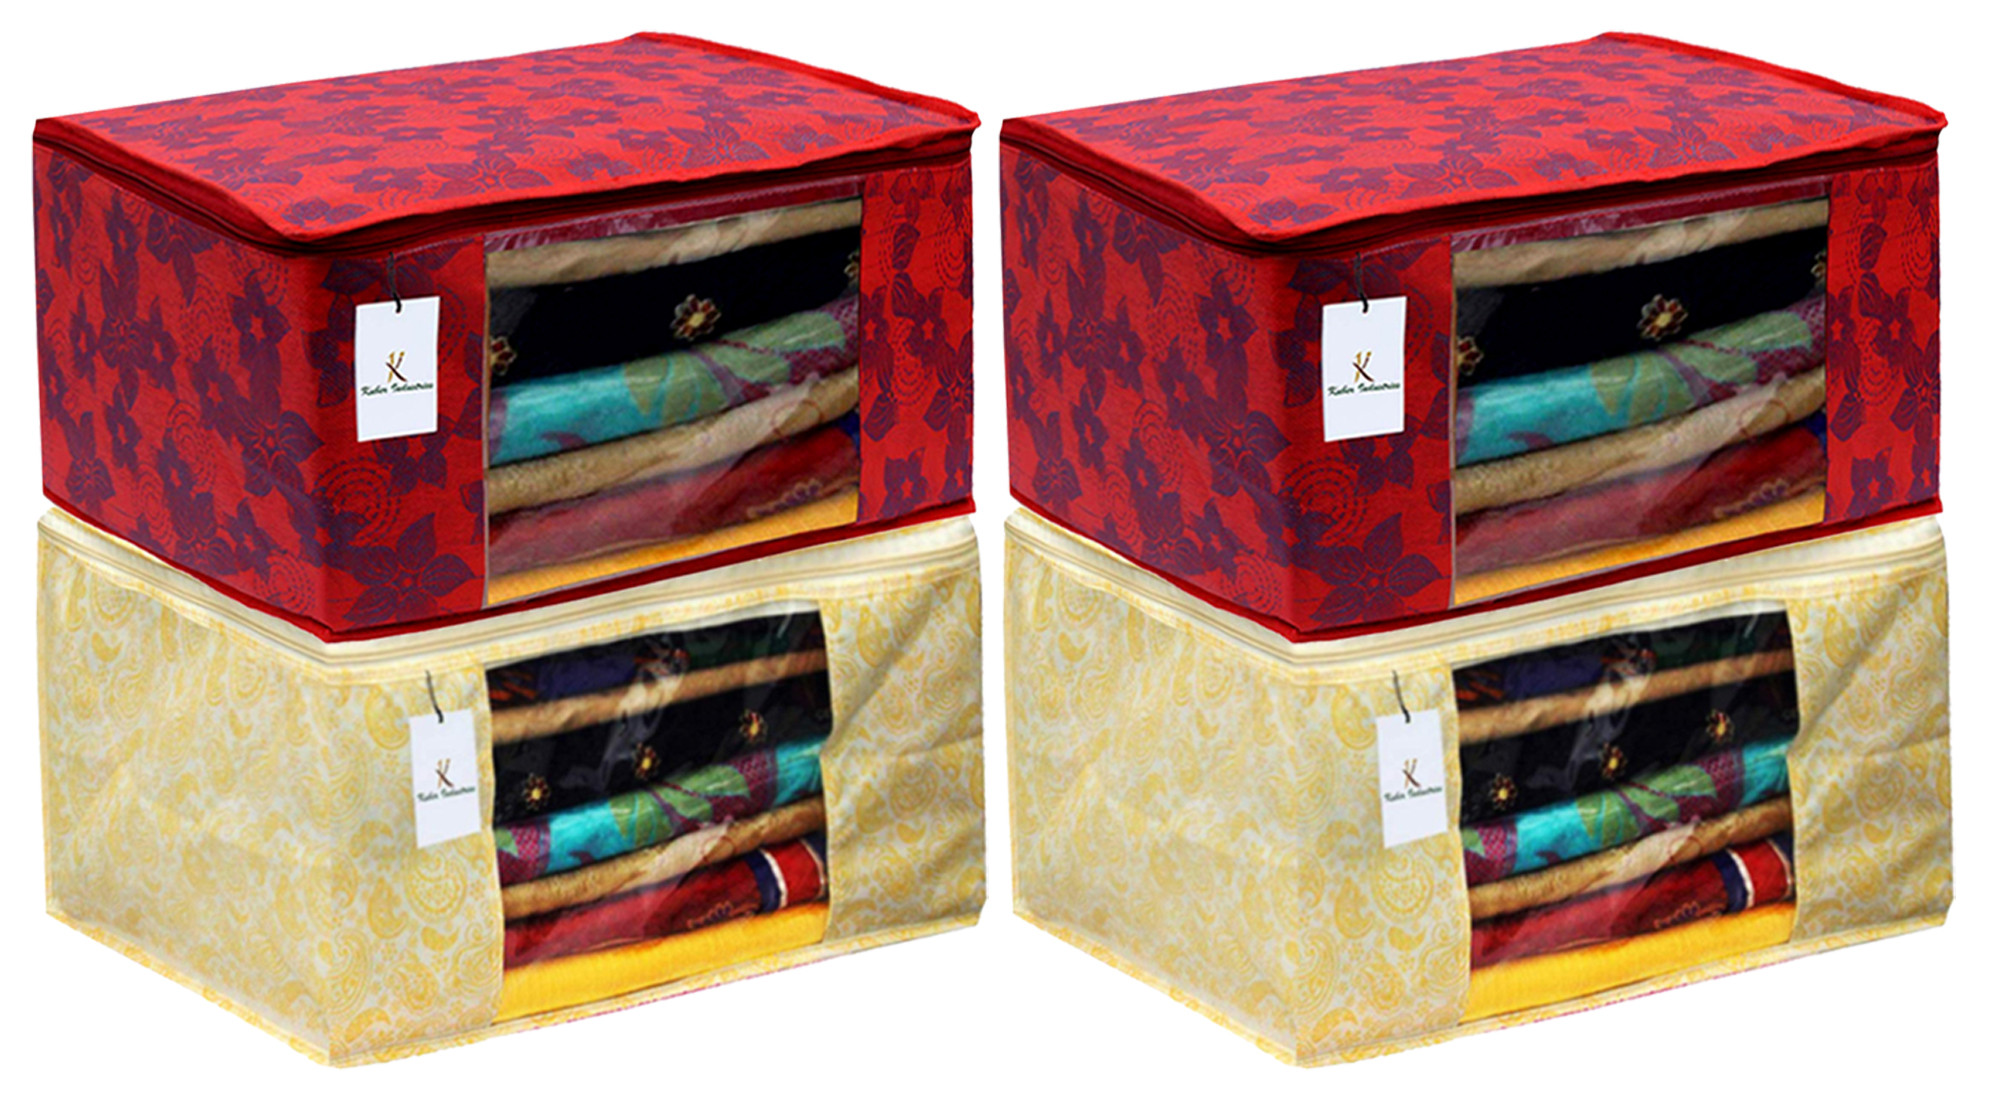 Kuber Industries Metalic Printed Non Woven Fabric Saree Cover Set with Transparent Window, Extra Large, Gold & Red -CTKTC40785